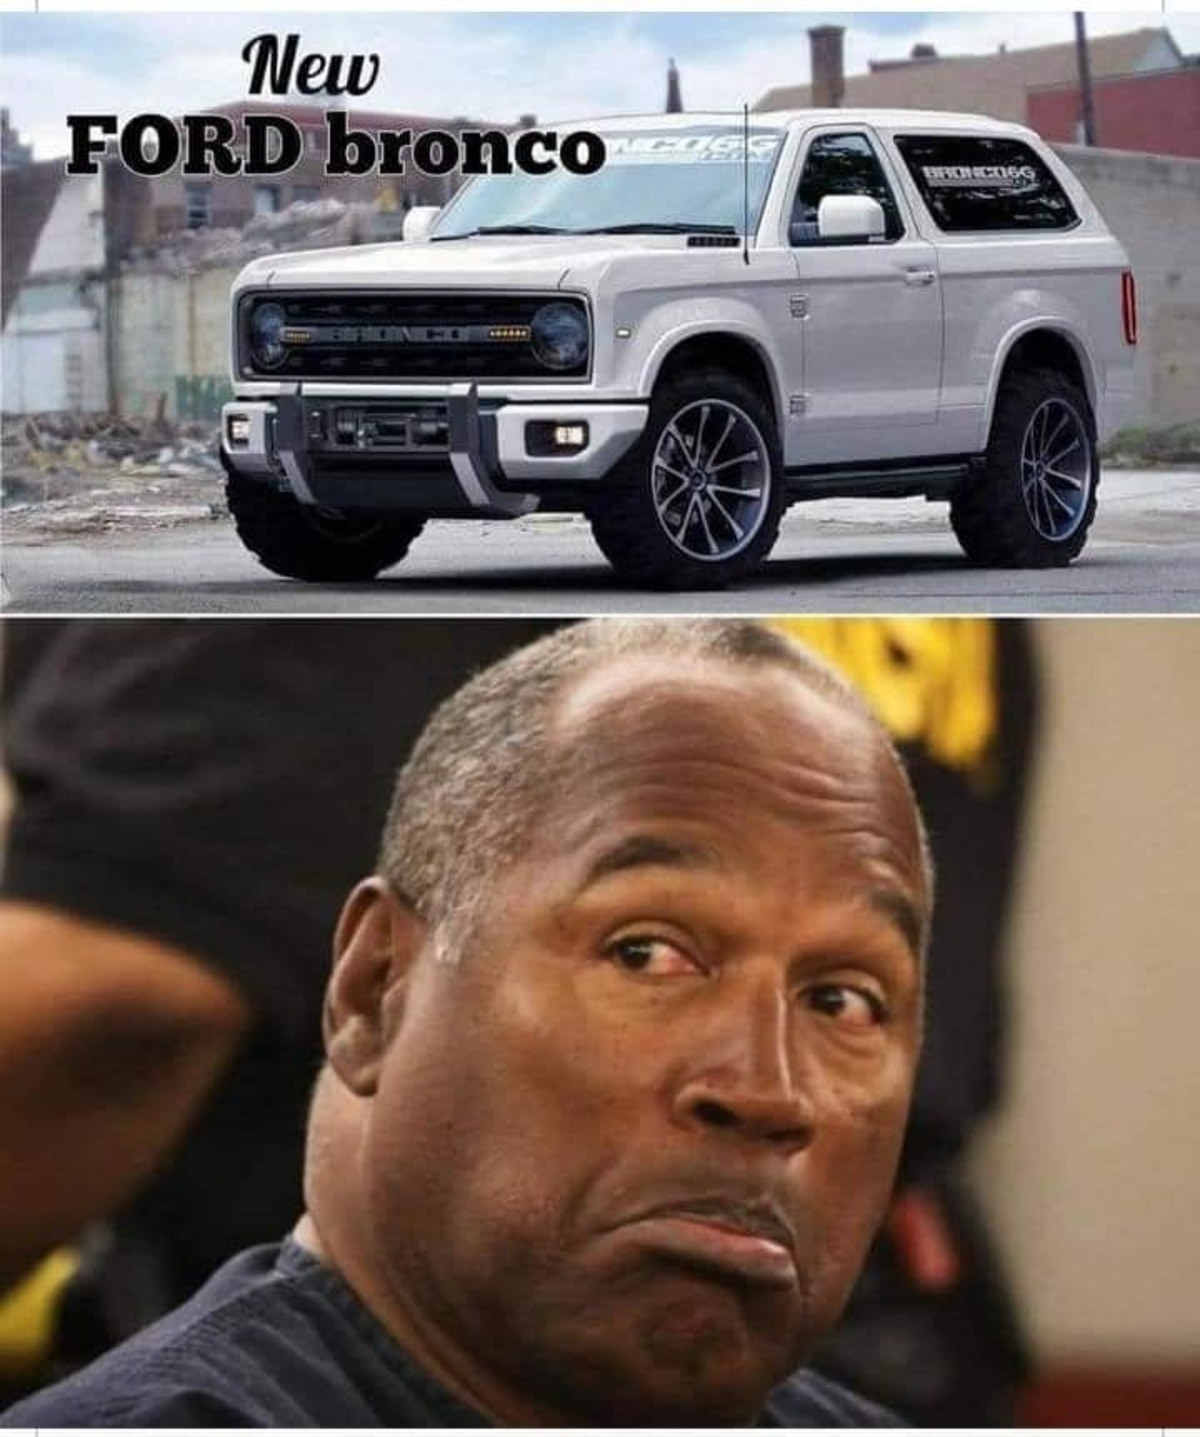 intolerable Eagle. .. Why show a cgi rendering of what people thought the new bronco would look like when the new bronco has been on the road for like 2 years and we know its not thi